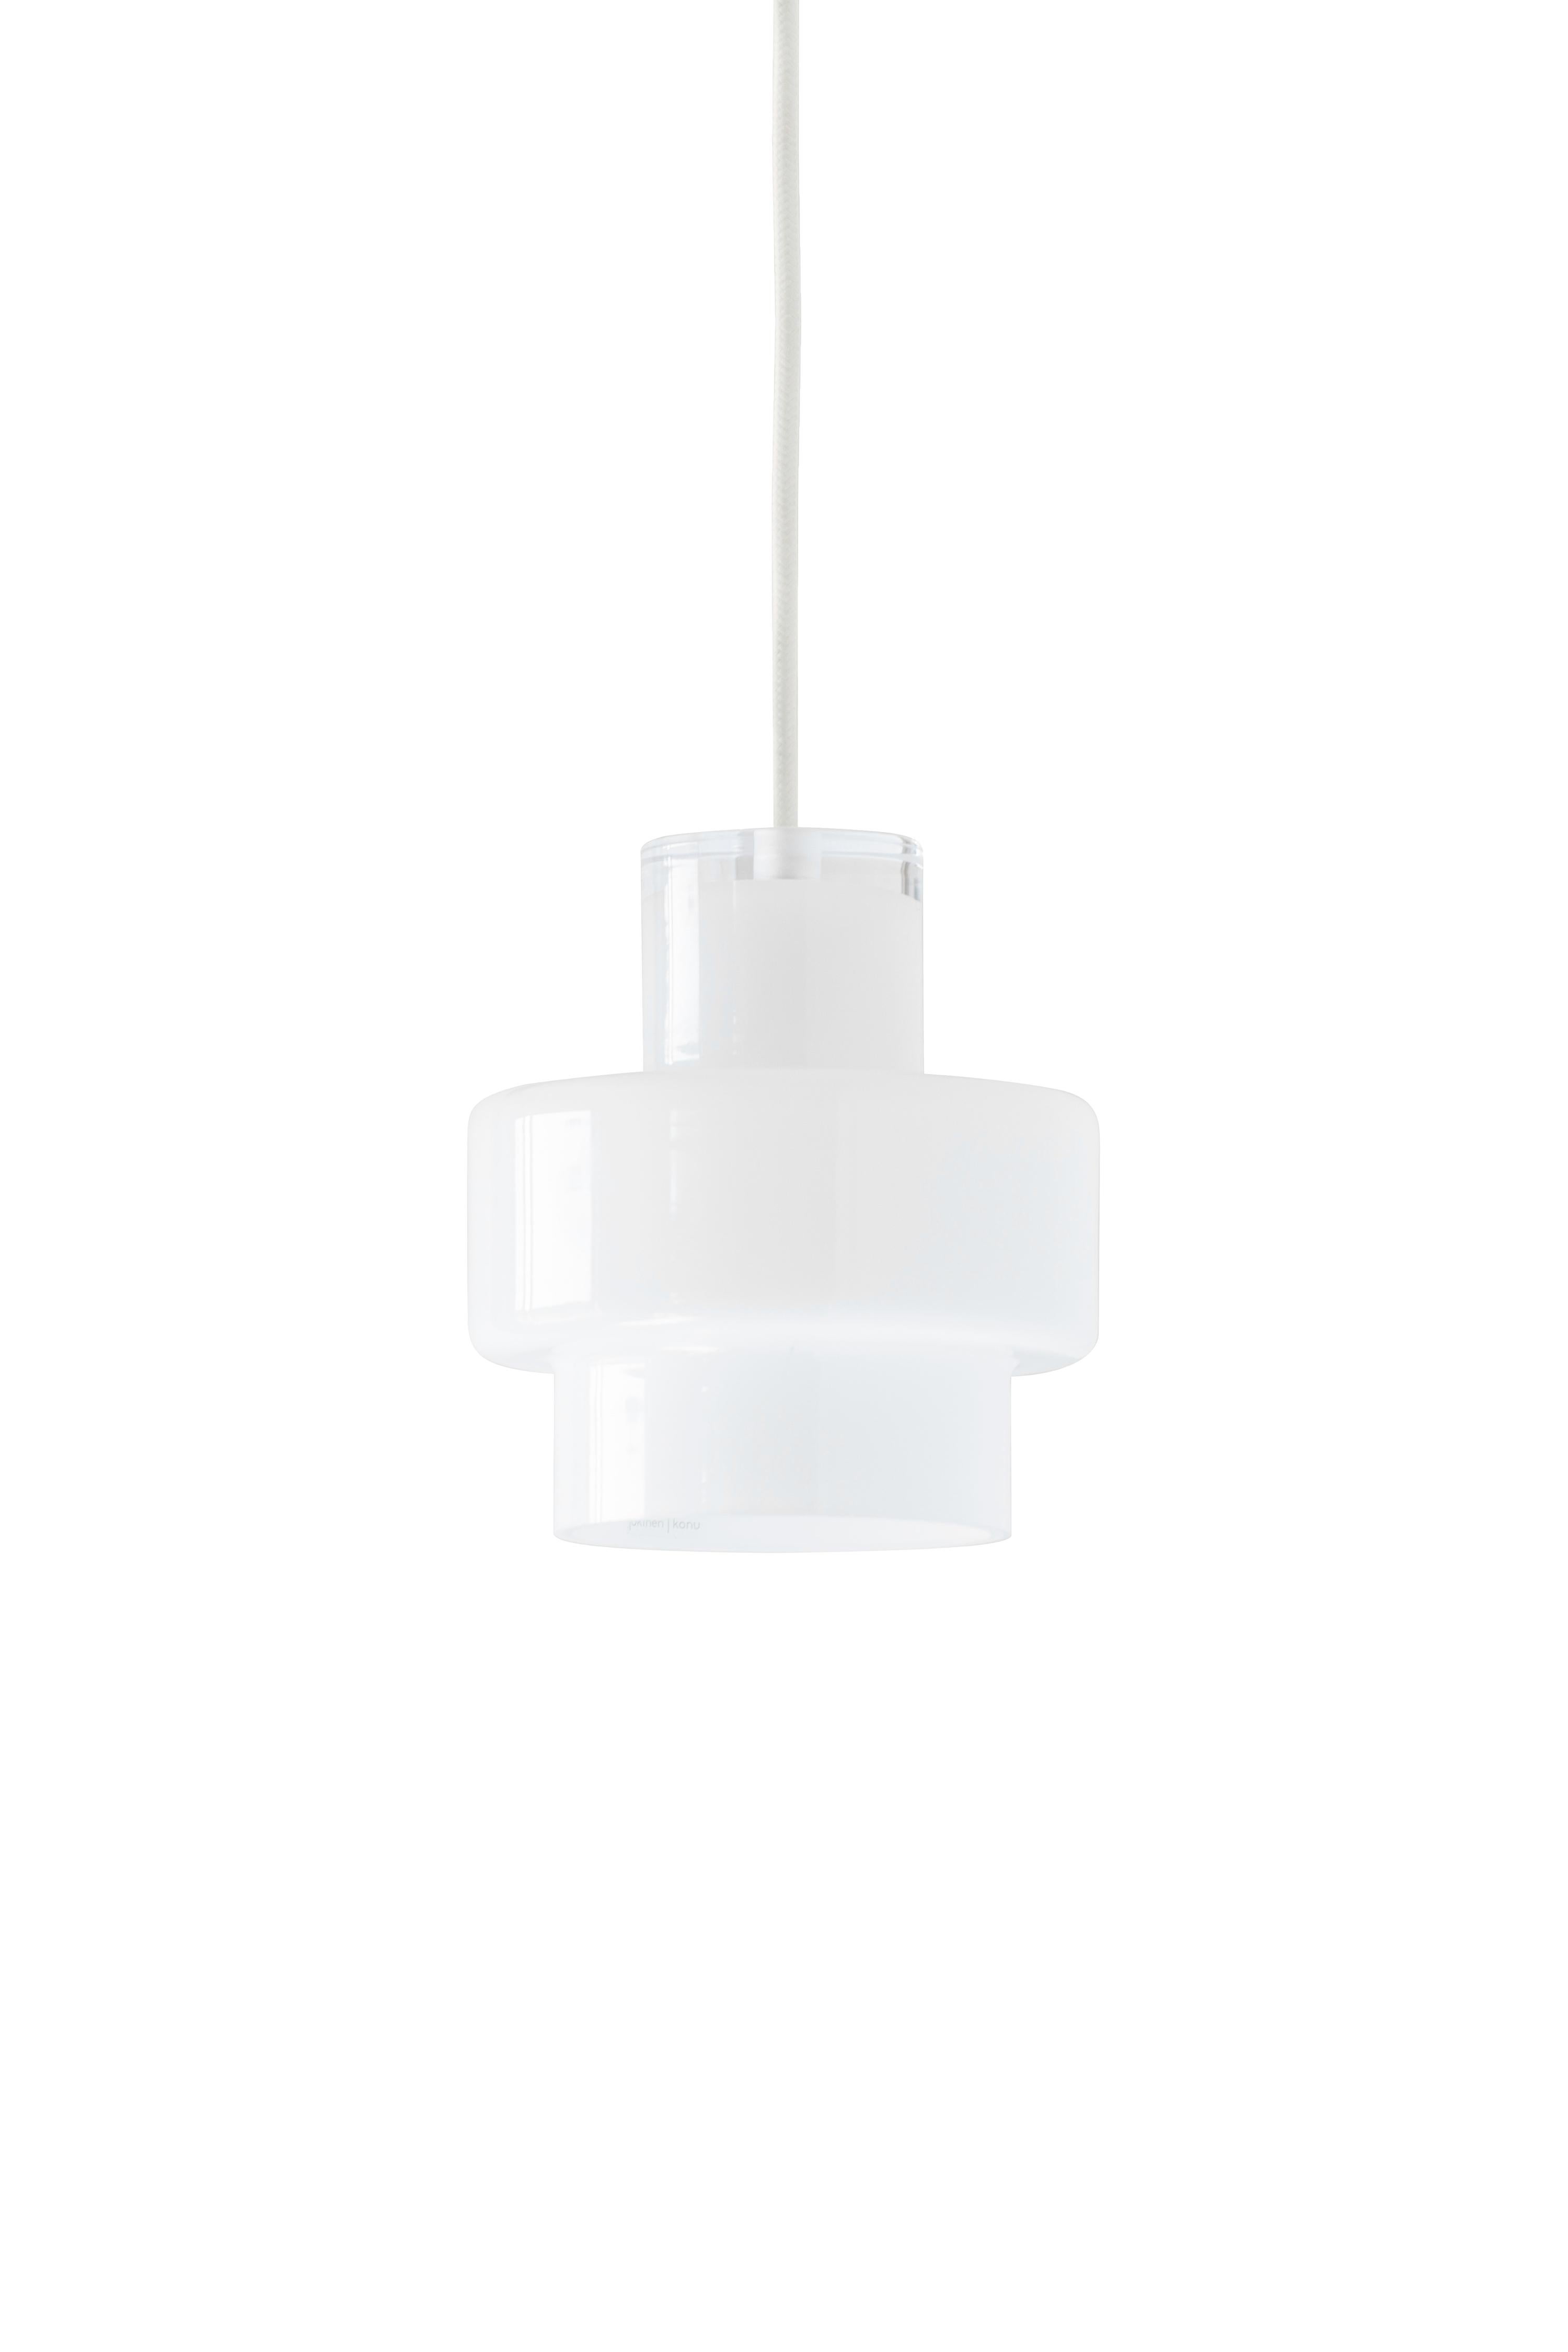 Blown Glass 'Multi M' Glass Pendant in Black by Jokinen and Konu for Innolux